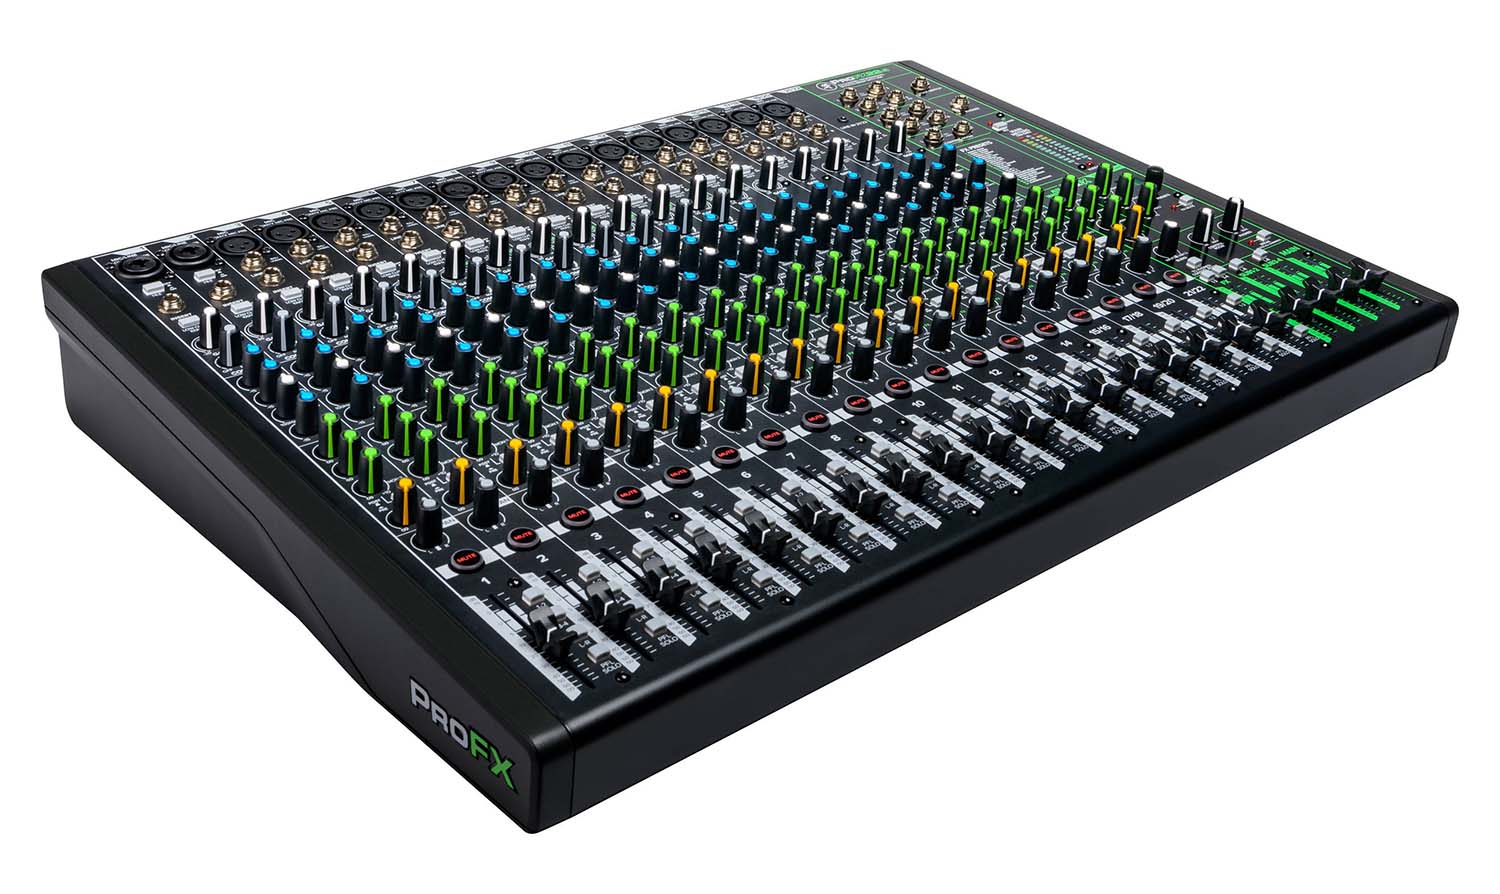 Mackie ProFX22v3, 22-Channel Professional Effects Mixer with USB - Hollywood DJ